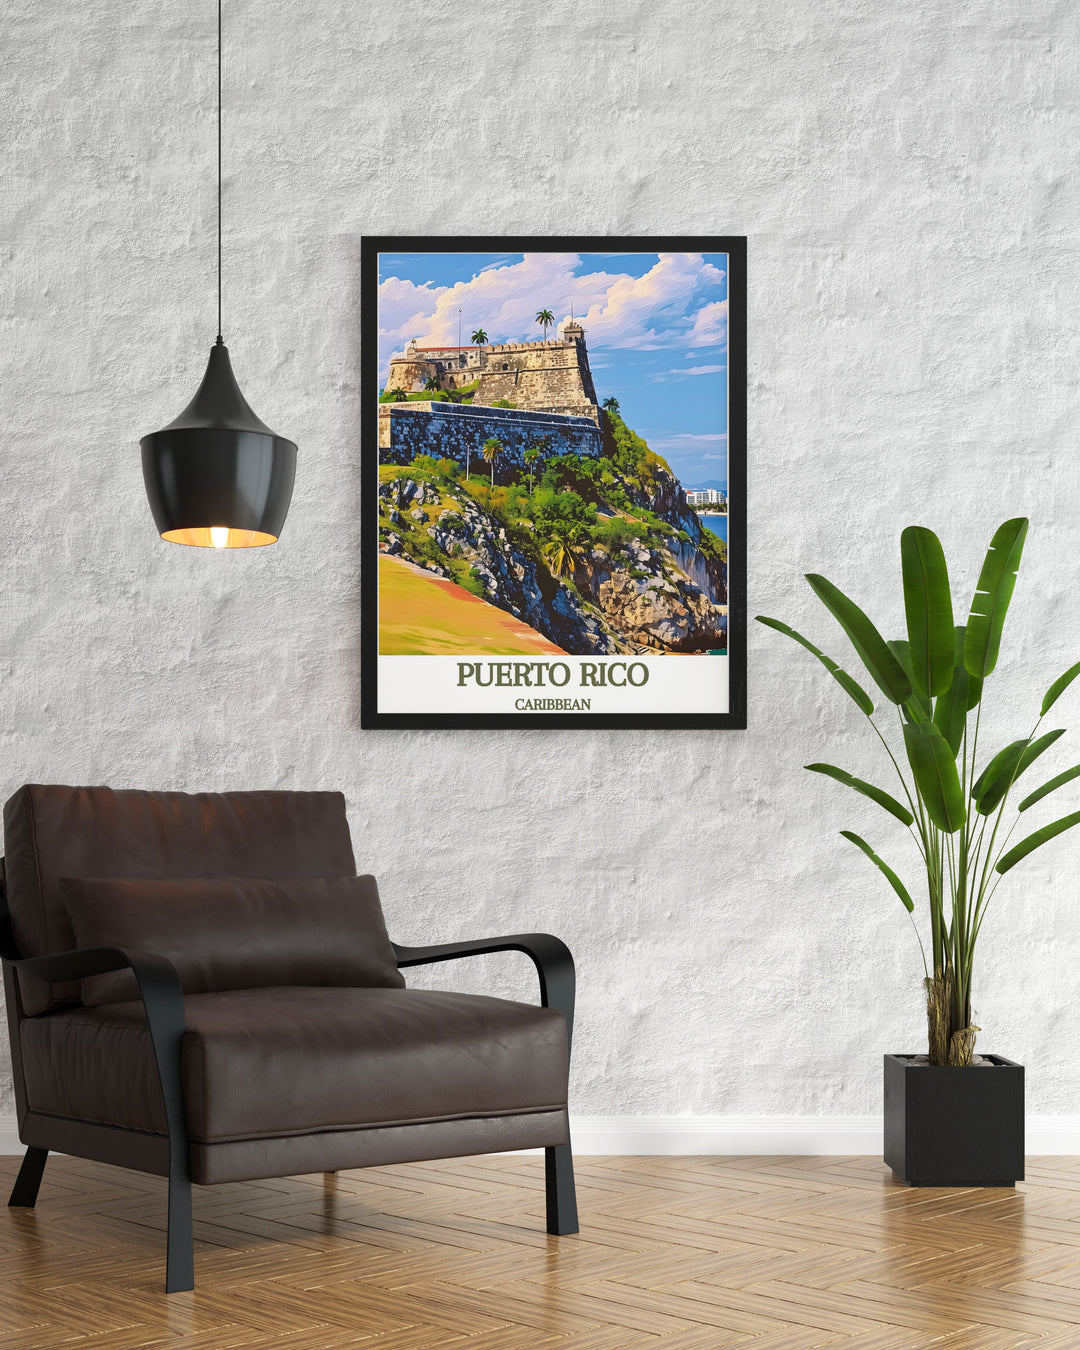 Beautiful Arecibo poster showcasing the majestic CARIBBEAN, Castillo San Felipe del Morro. This vintage print adds a touch of historical charm to any space. Great for personalized gifts or as part of a travel poster collection.